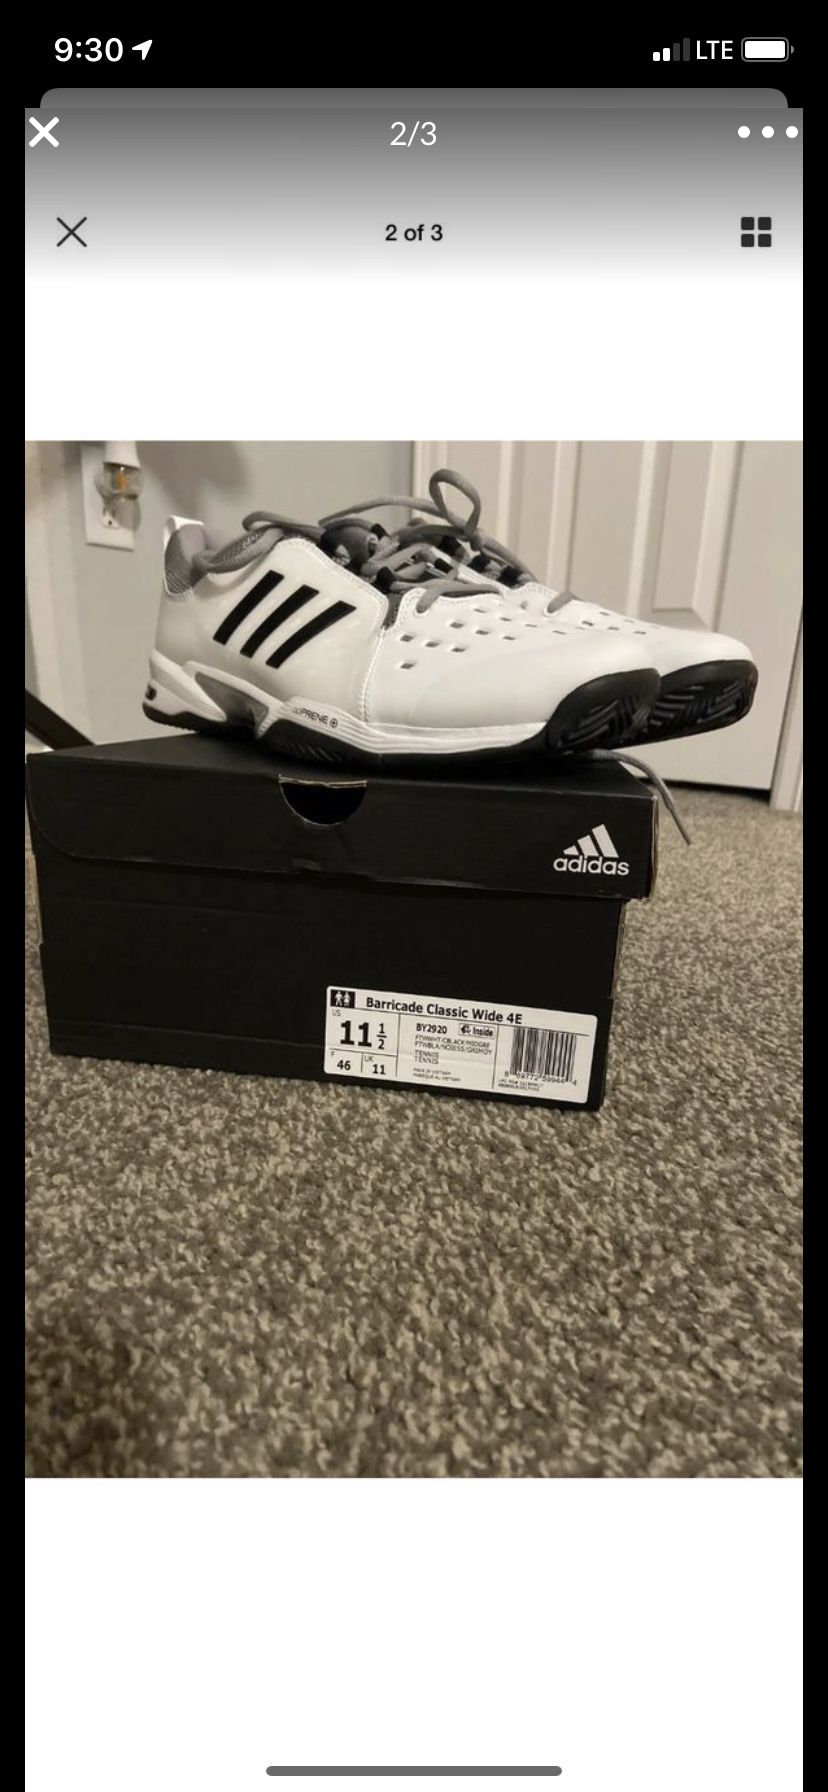 Adidas Barricade Classic Wide 4E Tennis Shoes White BY2920 Men's Size 11.5 NEW for in Broken Arrow, OK - OfferUp